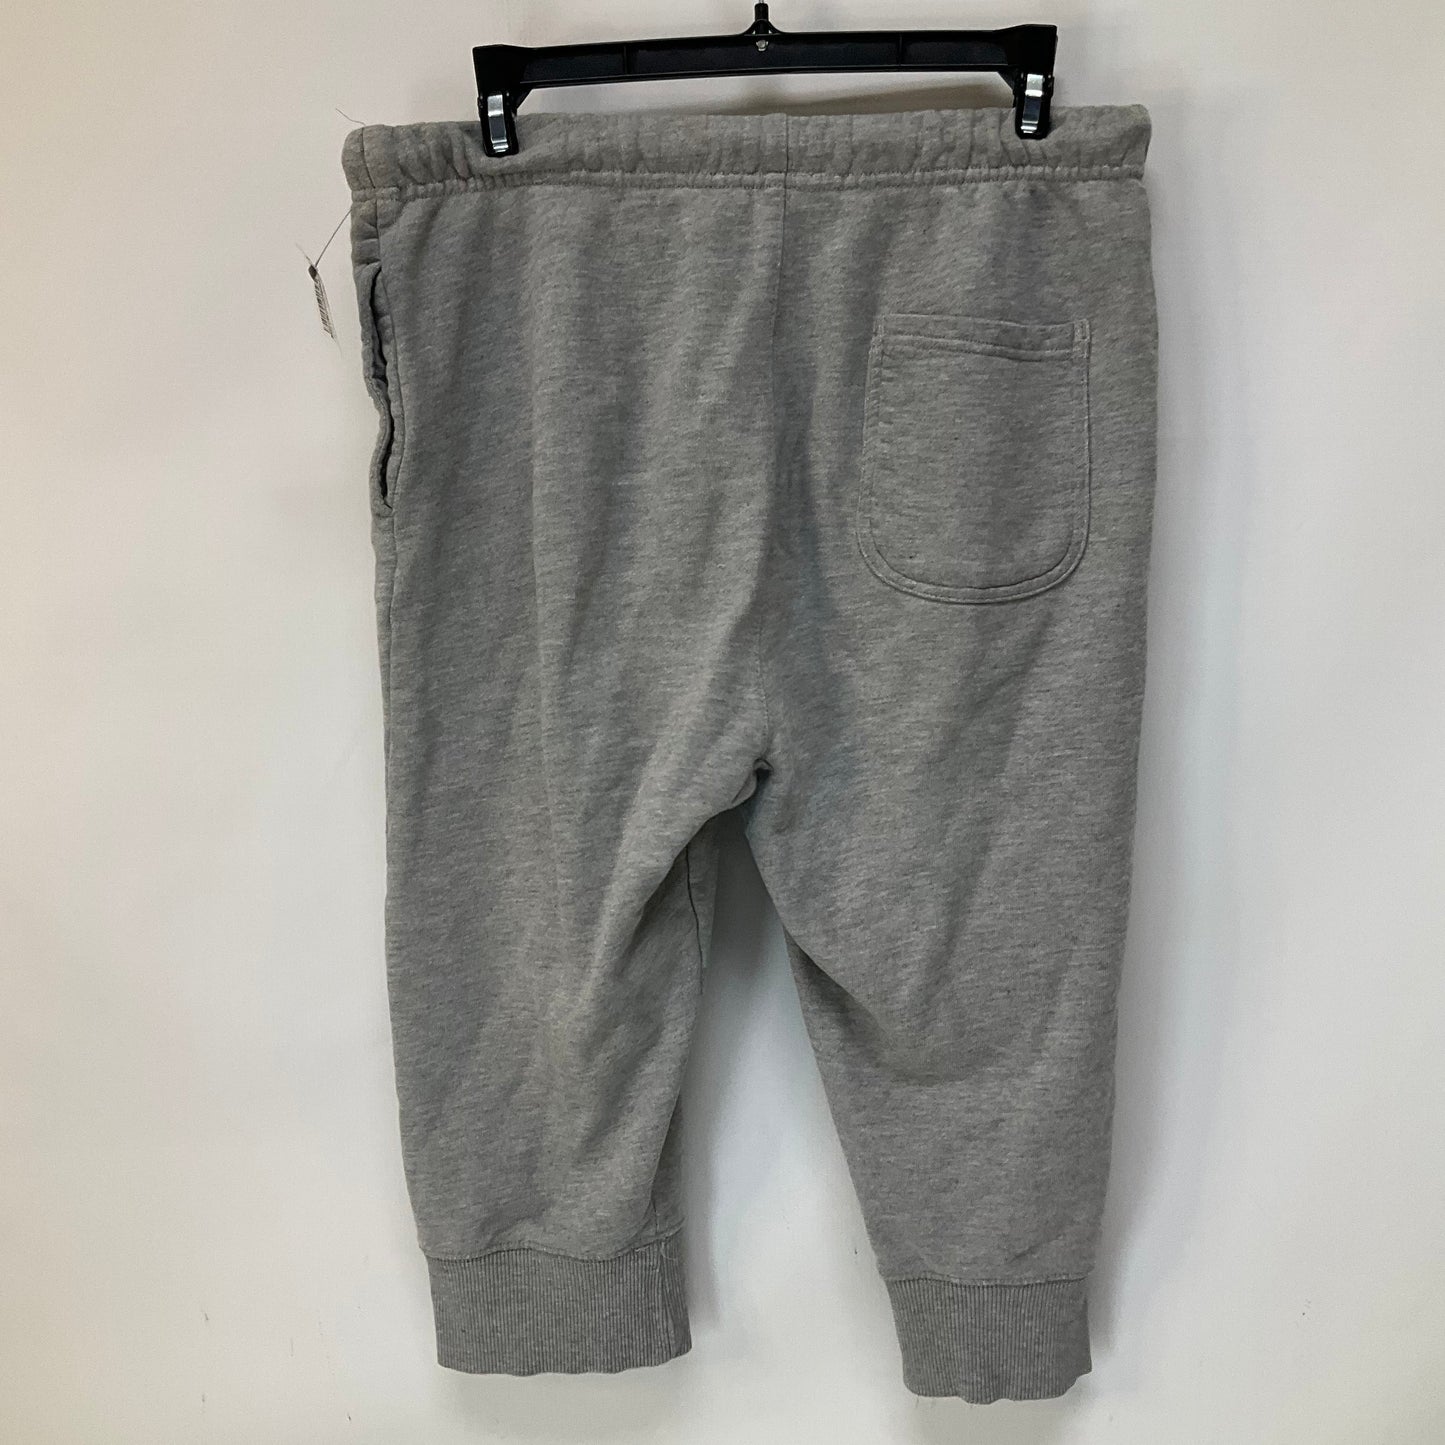 Grey Athletic Pants Free People, Size Xs